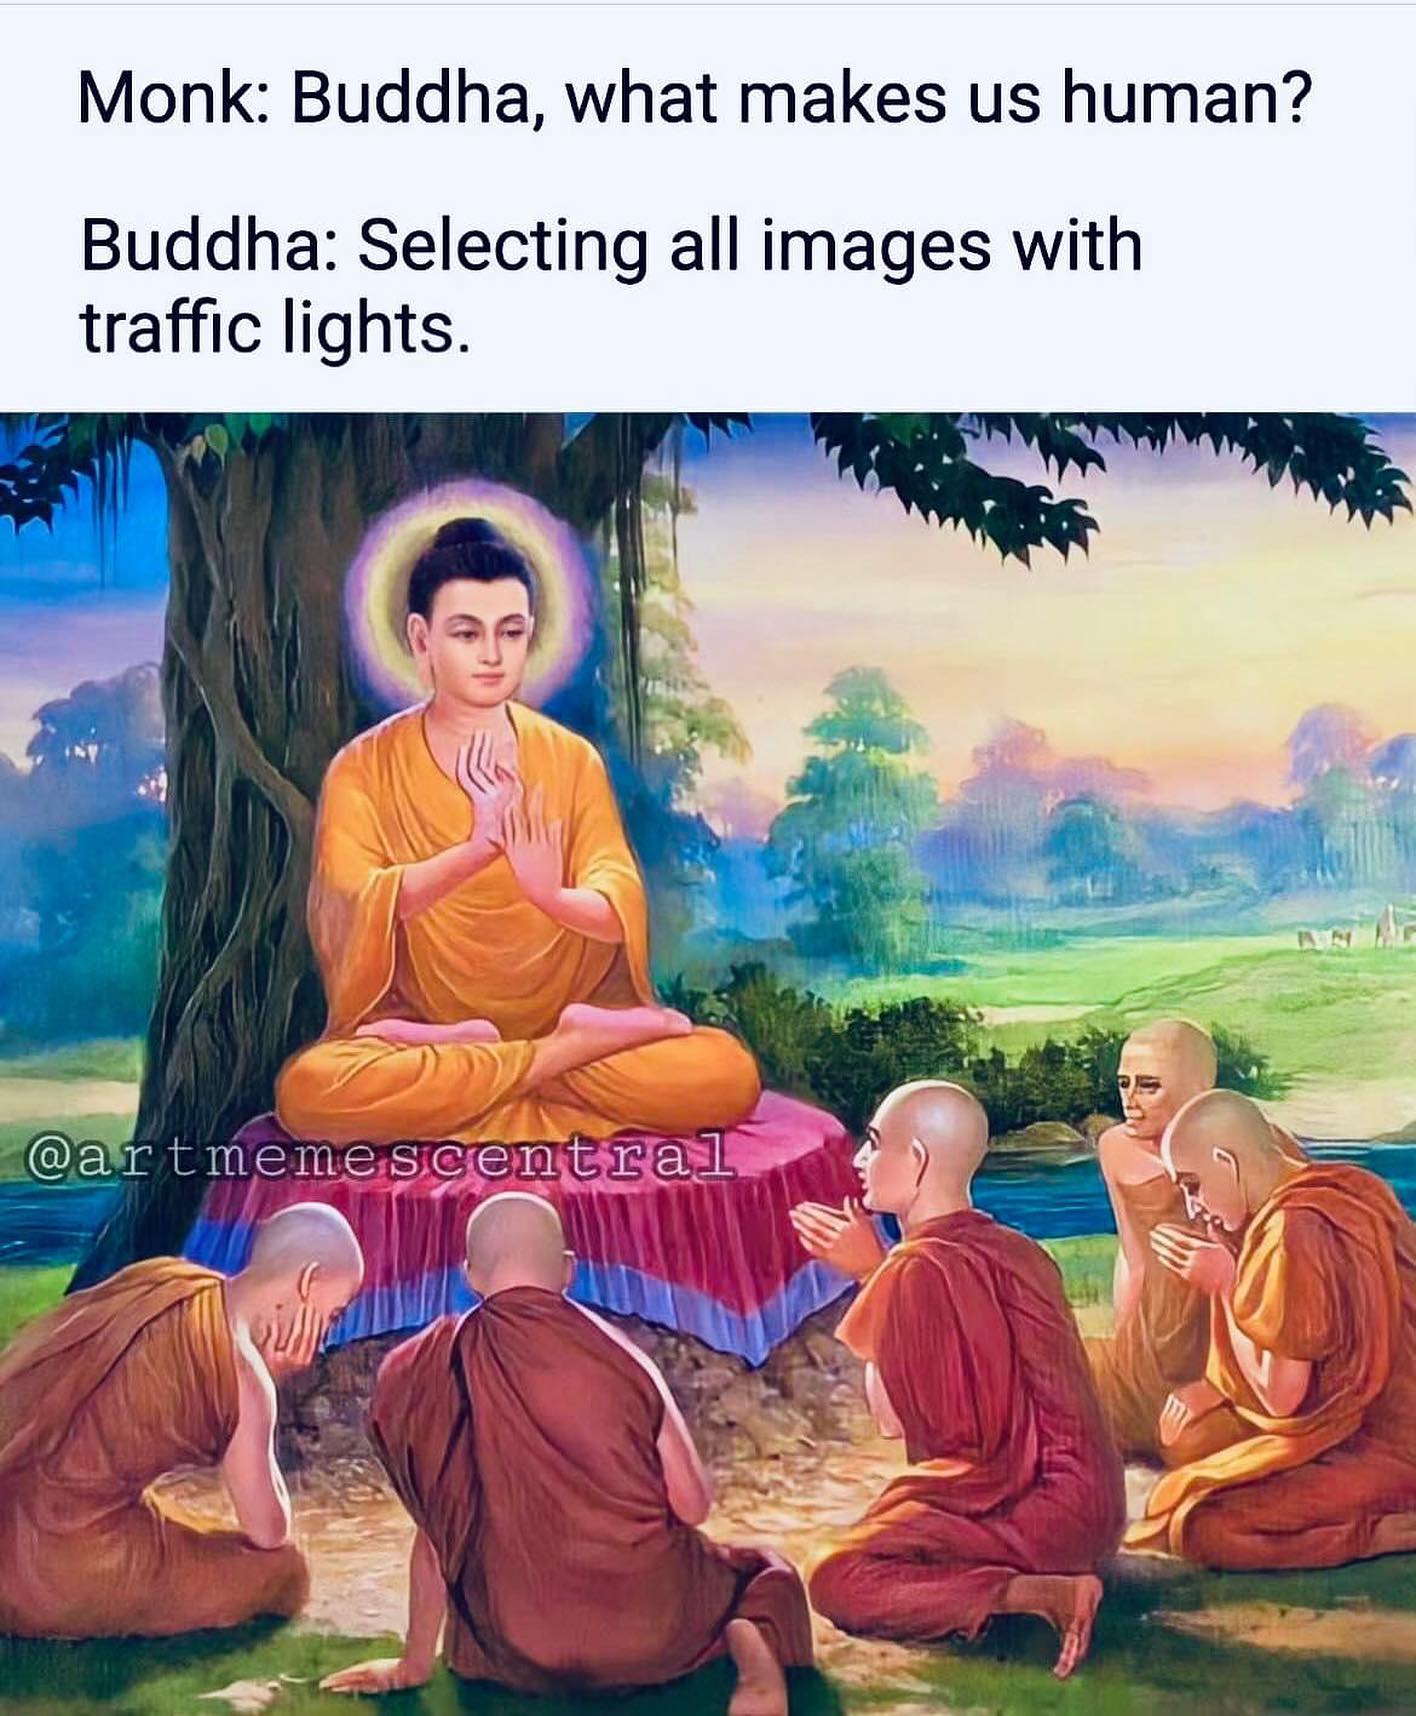 May be an image of 6 people and text that says 'Monk: Buddha, what makes us human? Buddha: Selecting all images with traffic lights. @artmemescentral'